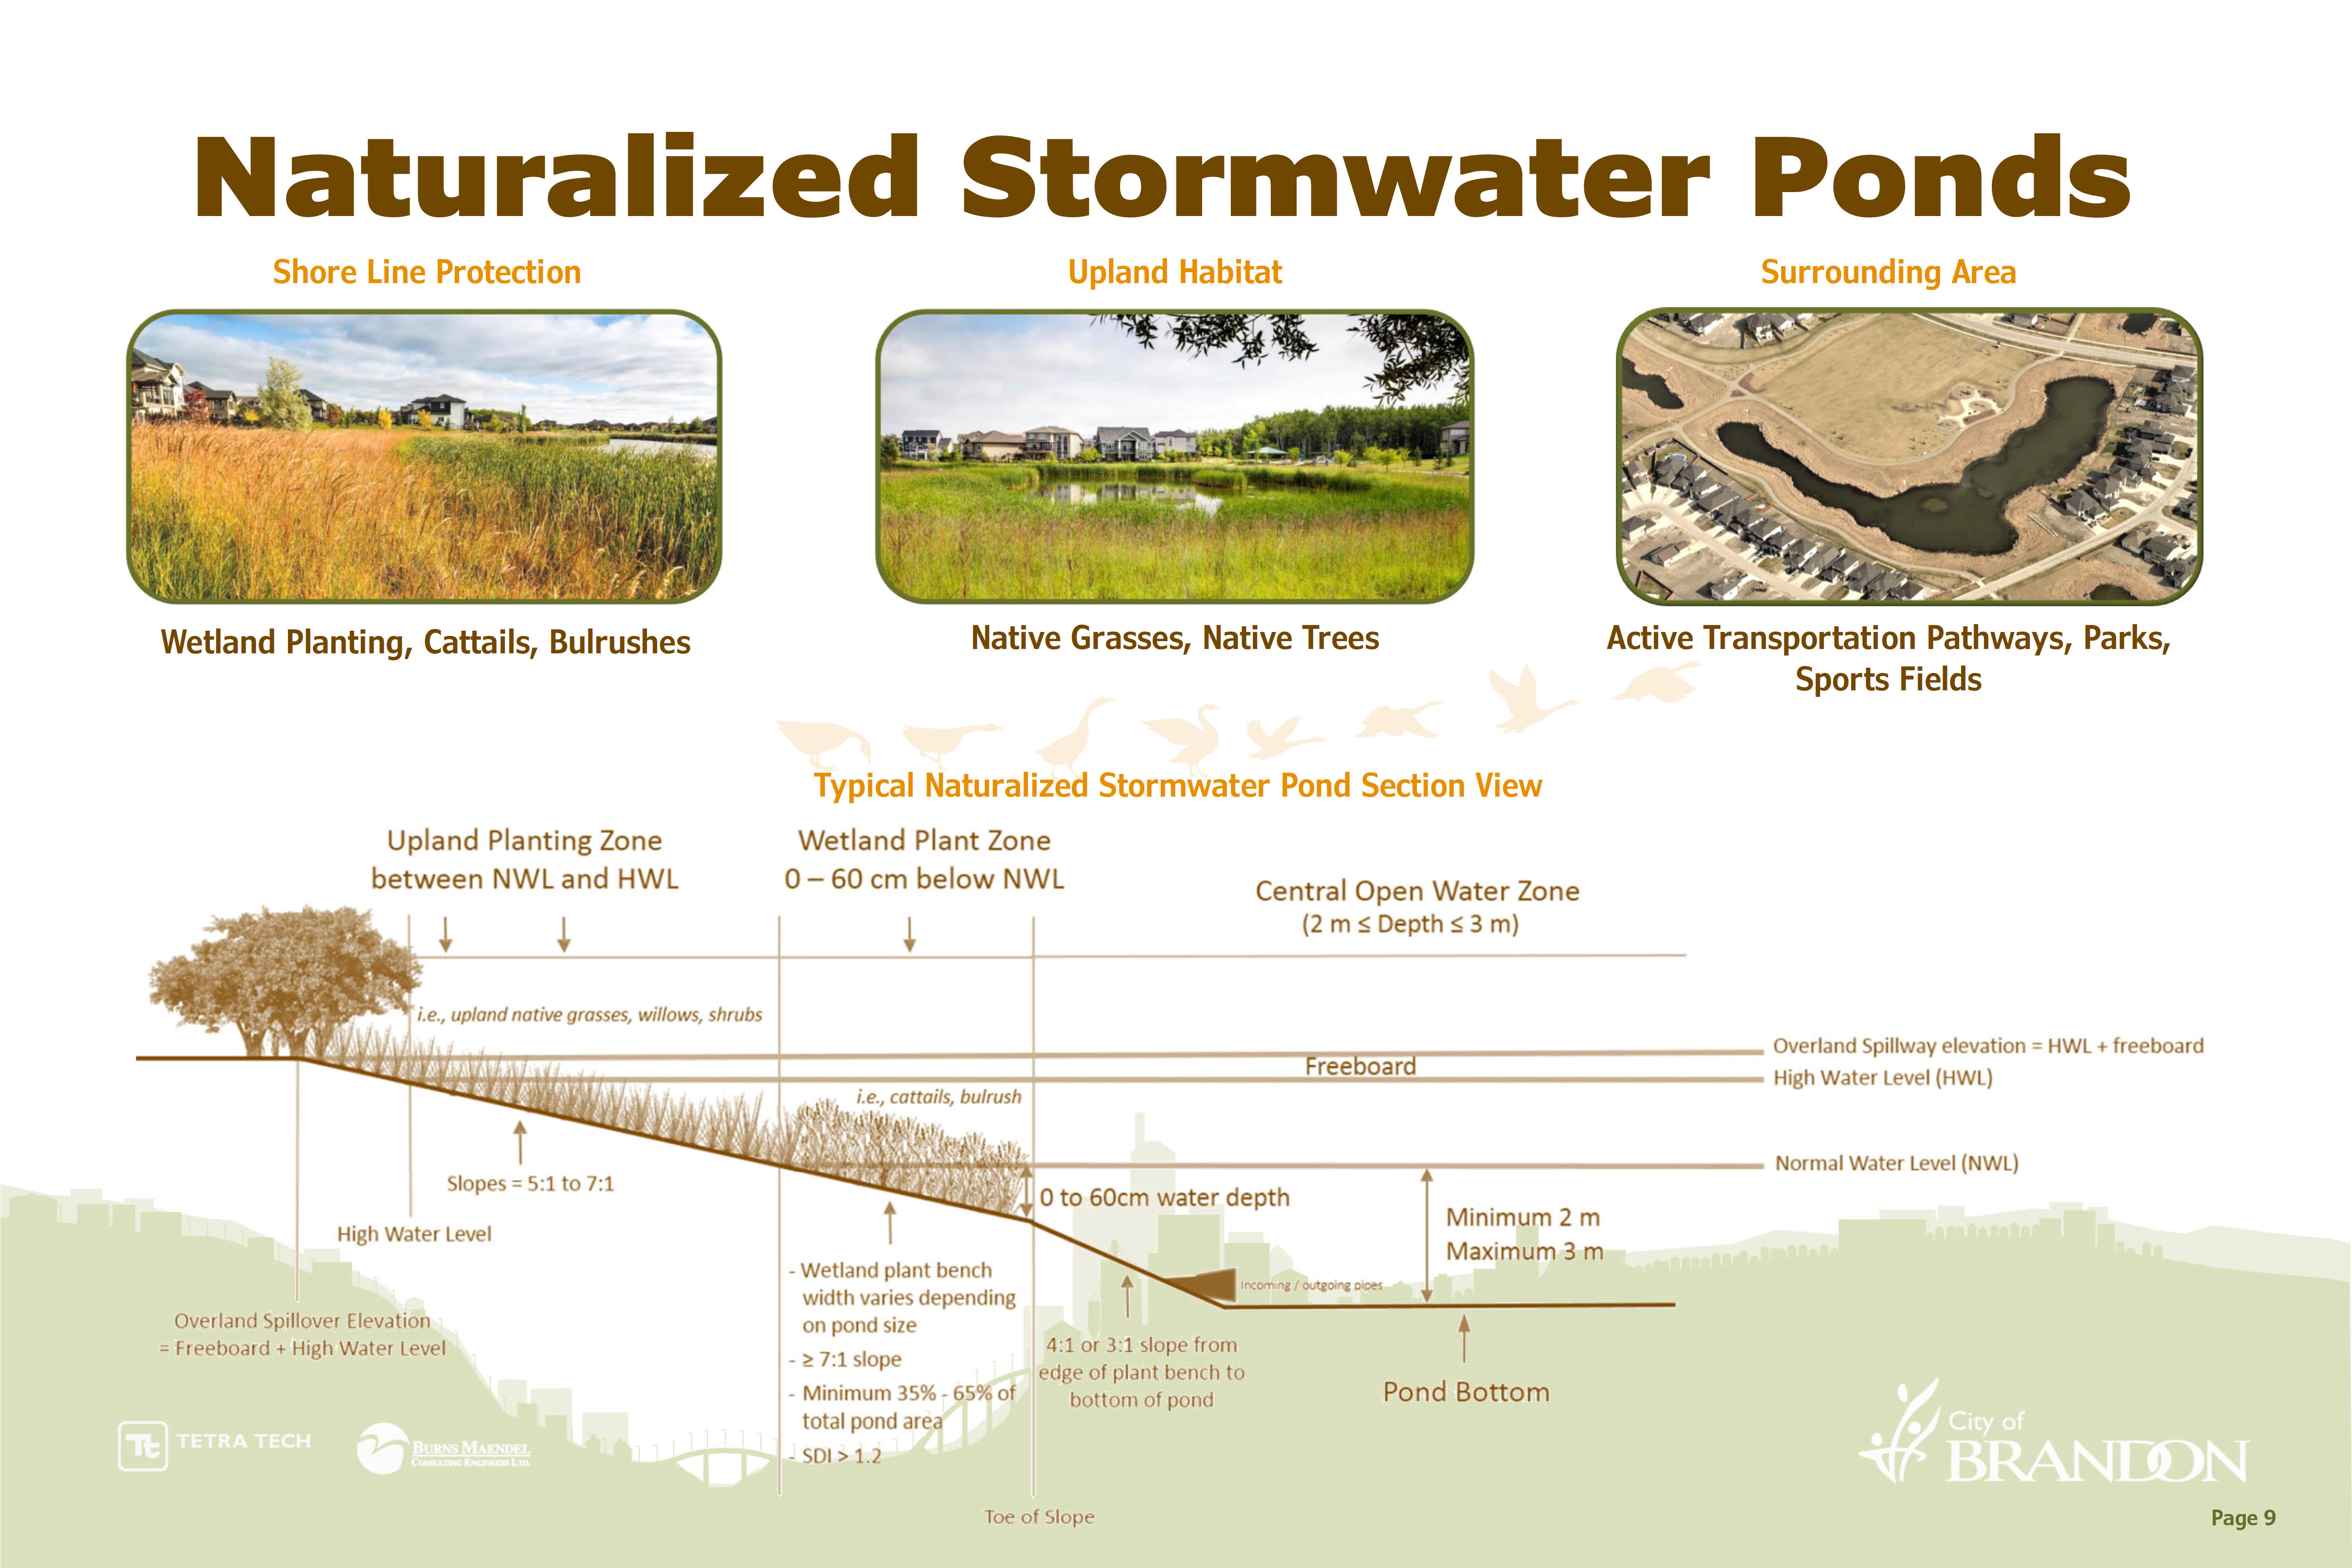 Naturalized Stormwater Ponds